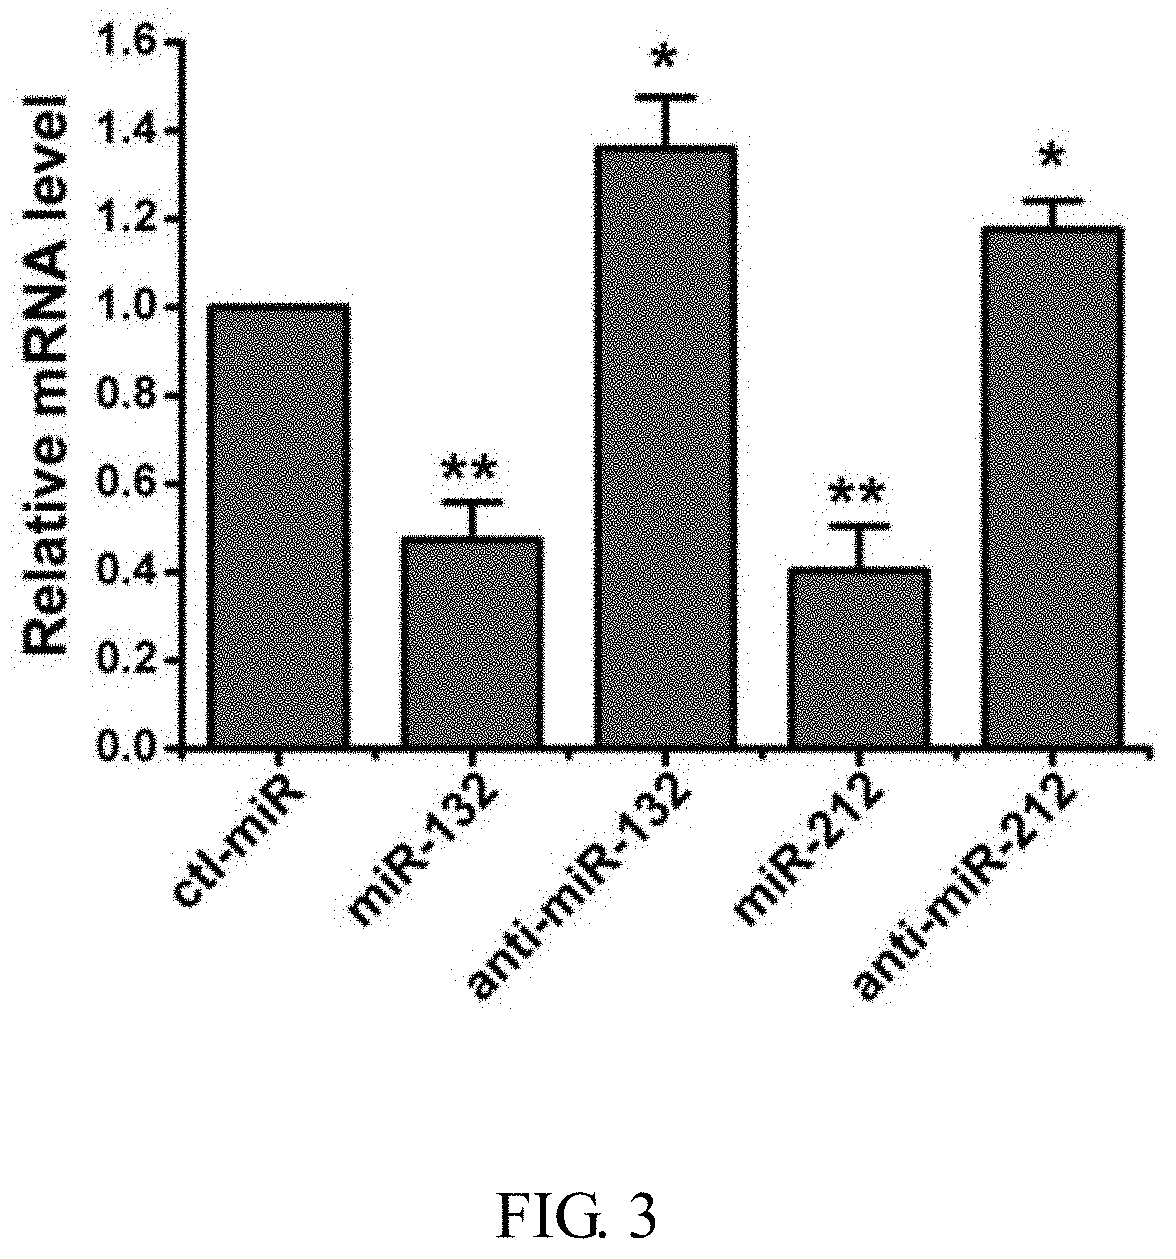 Use of mir-132 and mir-212 in preparation of drug for treating addiction